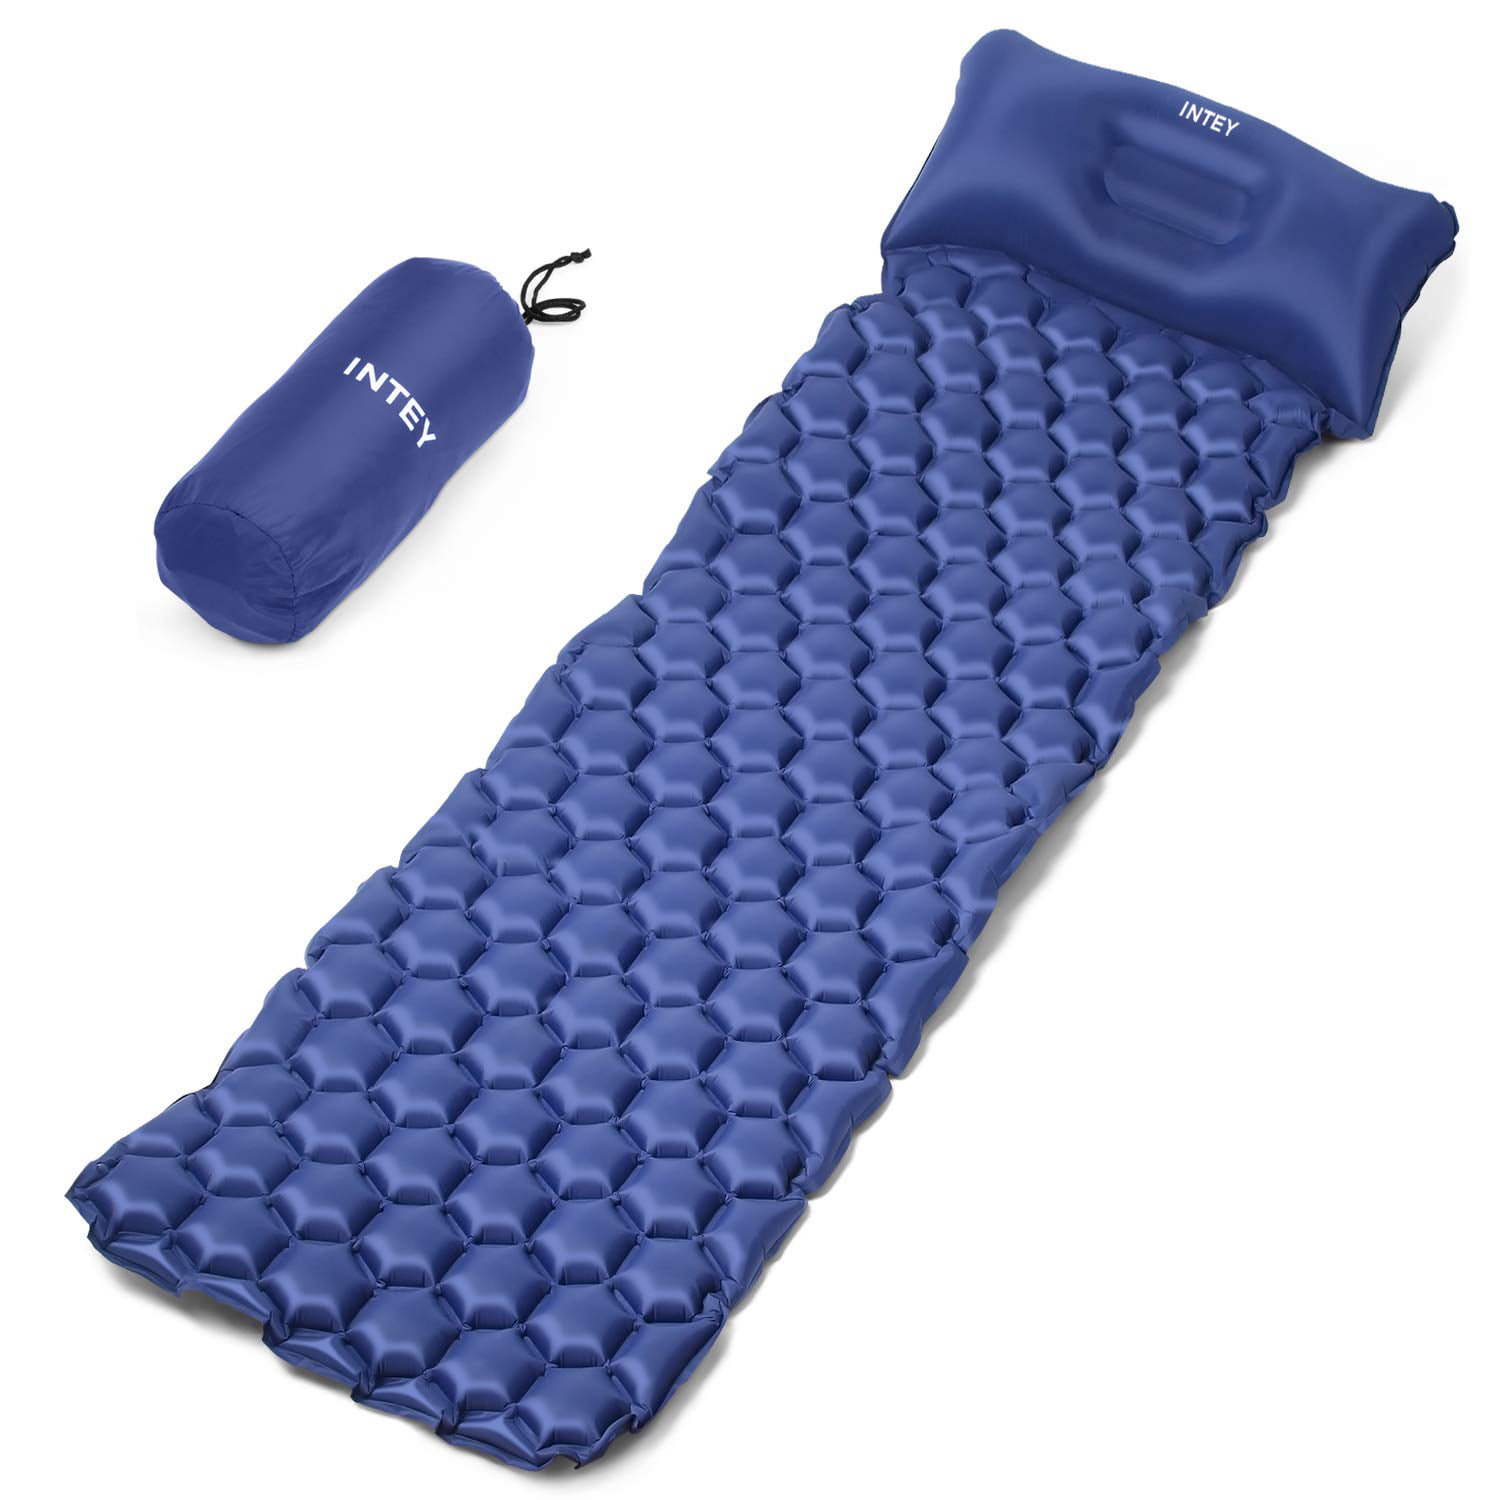 Outdoor Camping Sleeping Pad Inflatable Air Mat w/Pillow Lightweight for Hiking